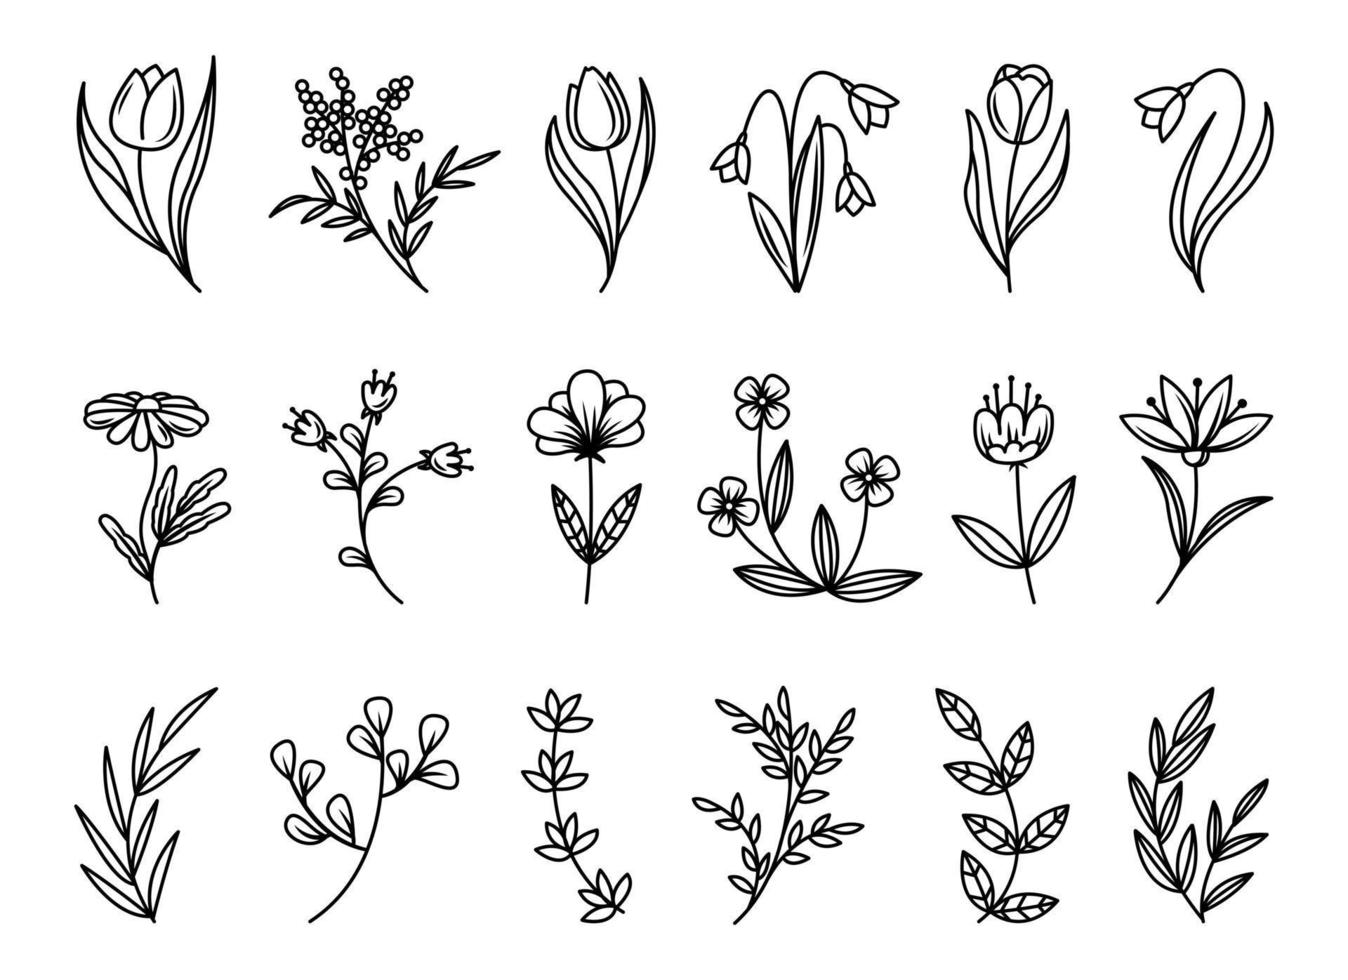 Doodle-style floral elements, leaves and twigs made in vector. For wedding design, logo and greeting card. vector